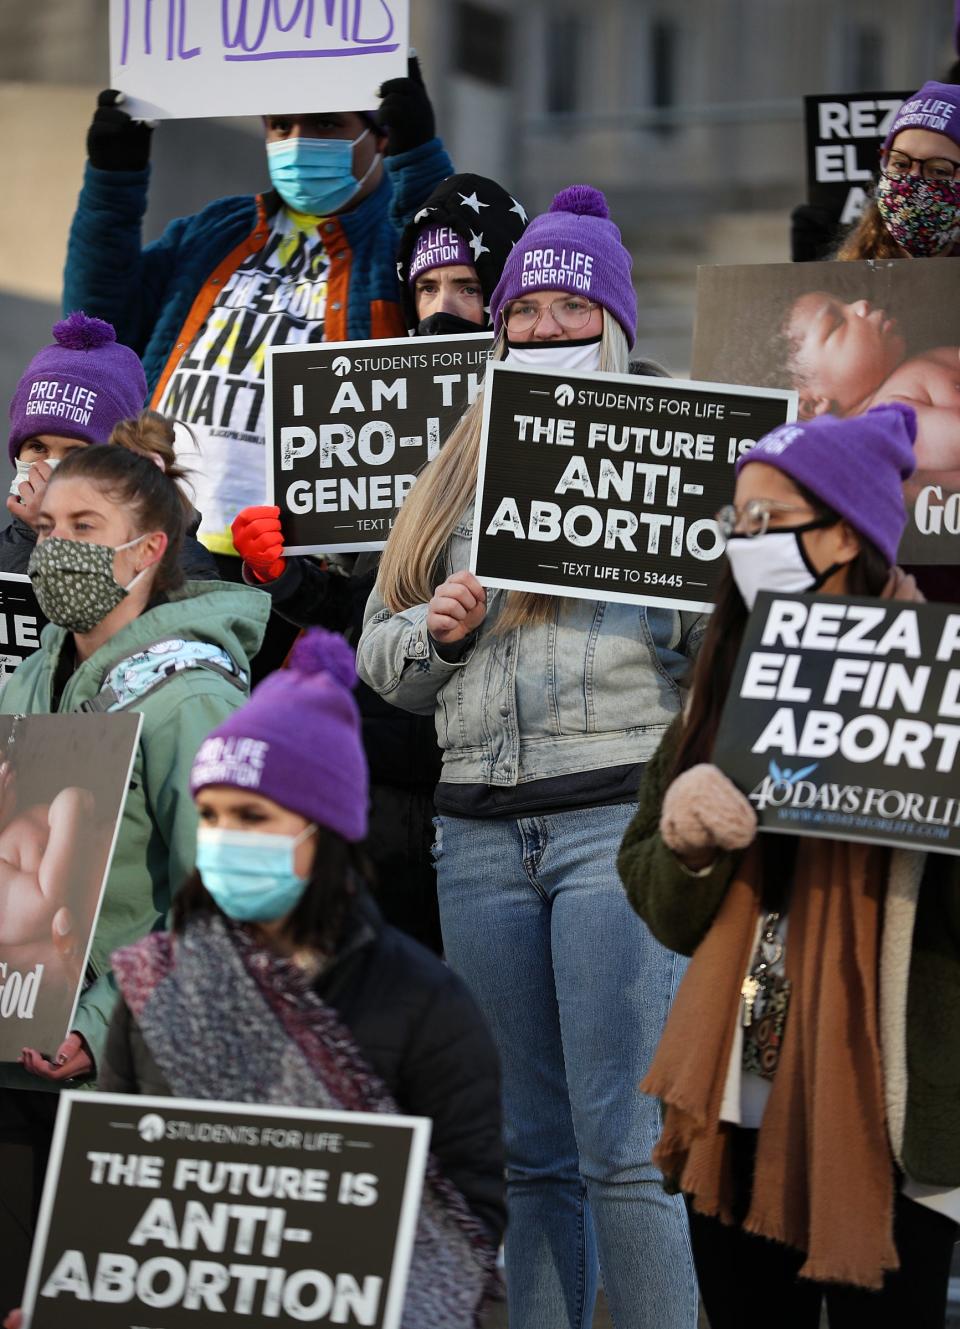 Demonstrators hold signs during an anti-abortion protest Friday, Jan. 29, 2021 at Monument Circle in downtown Indianapolis.